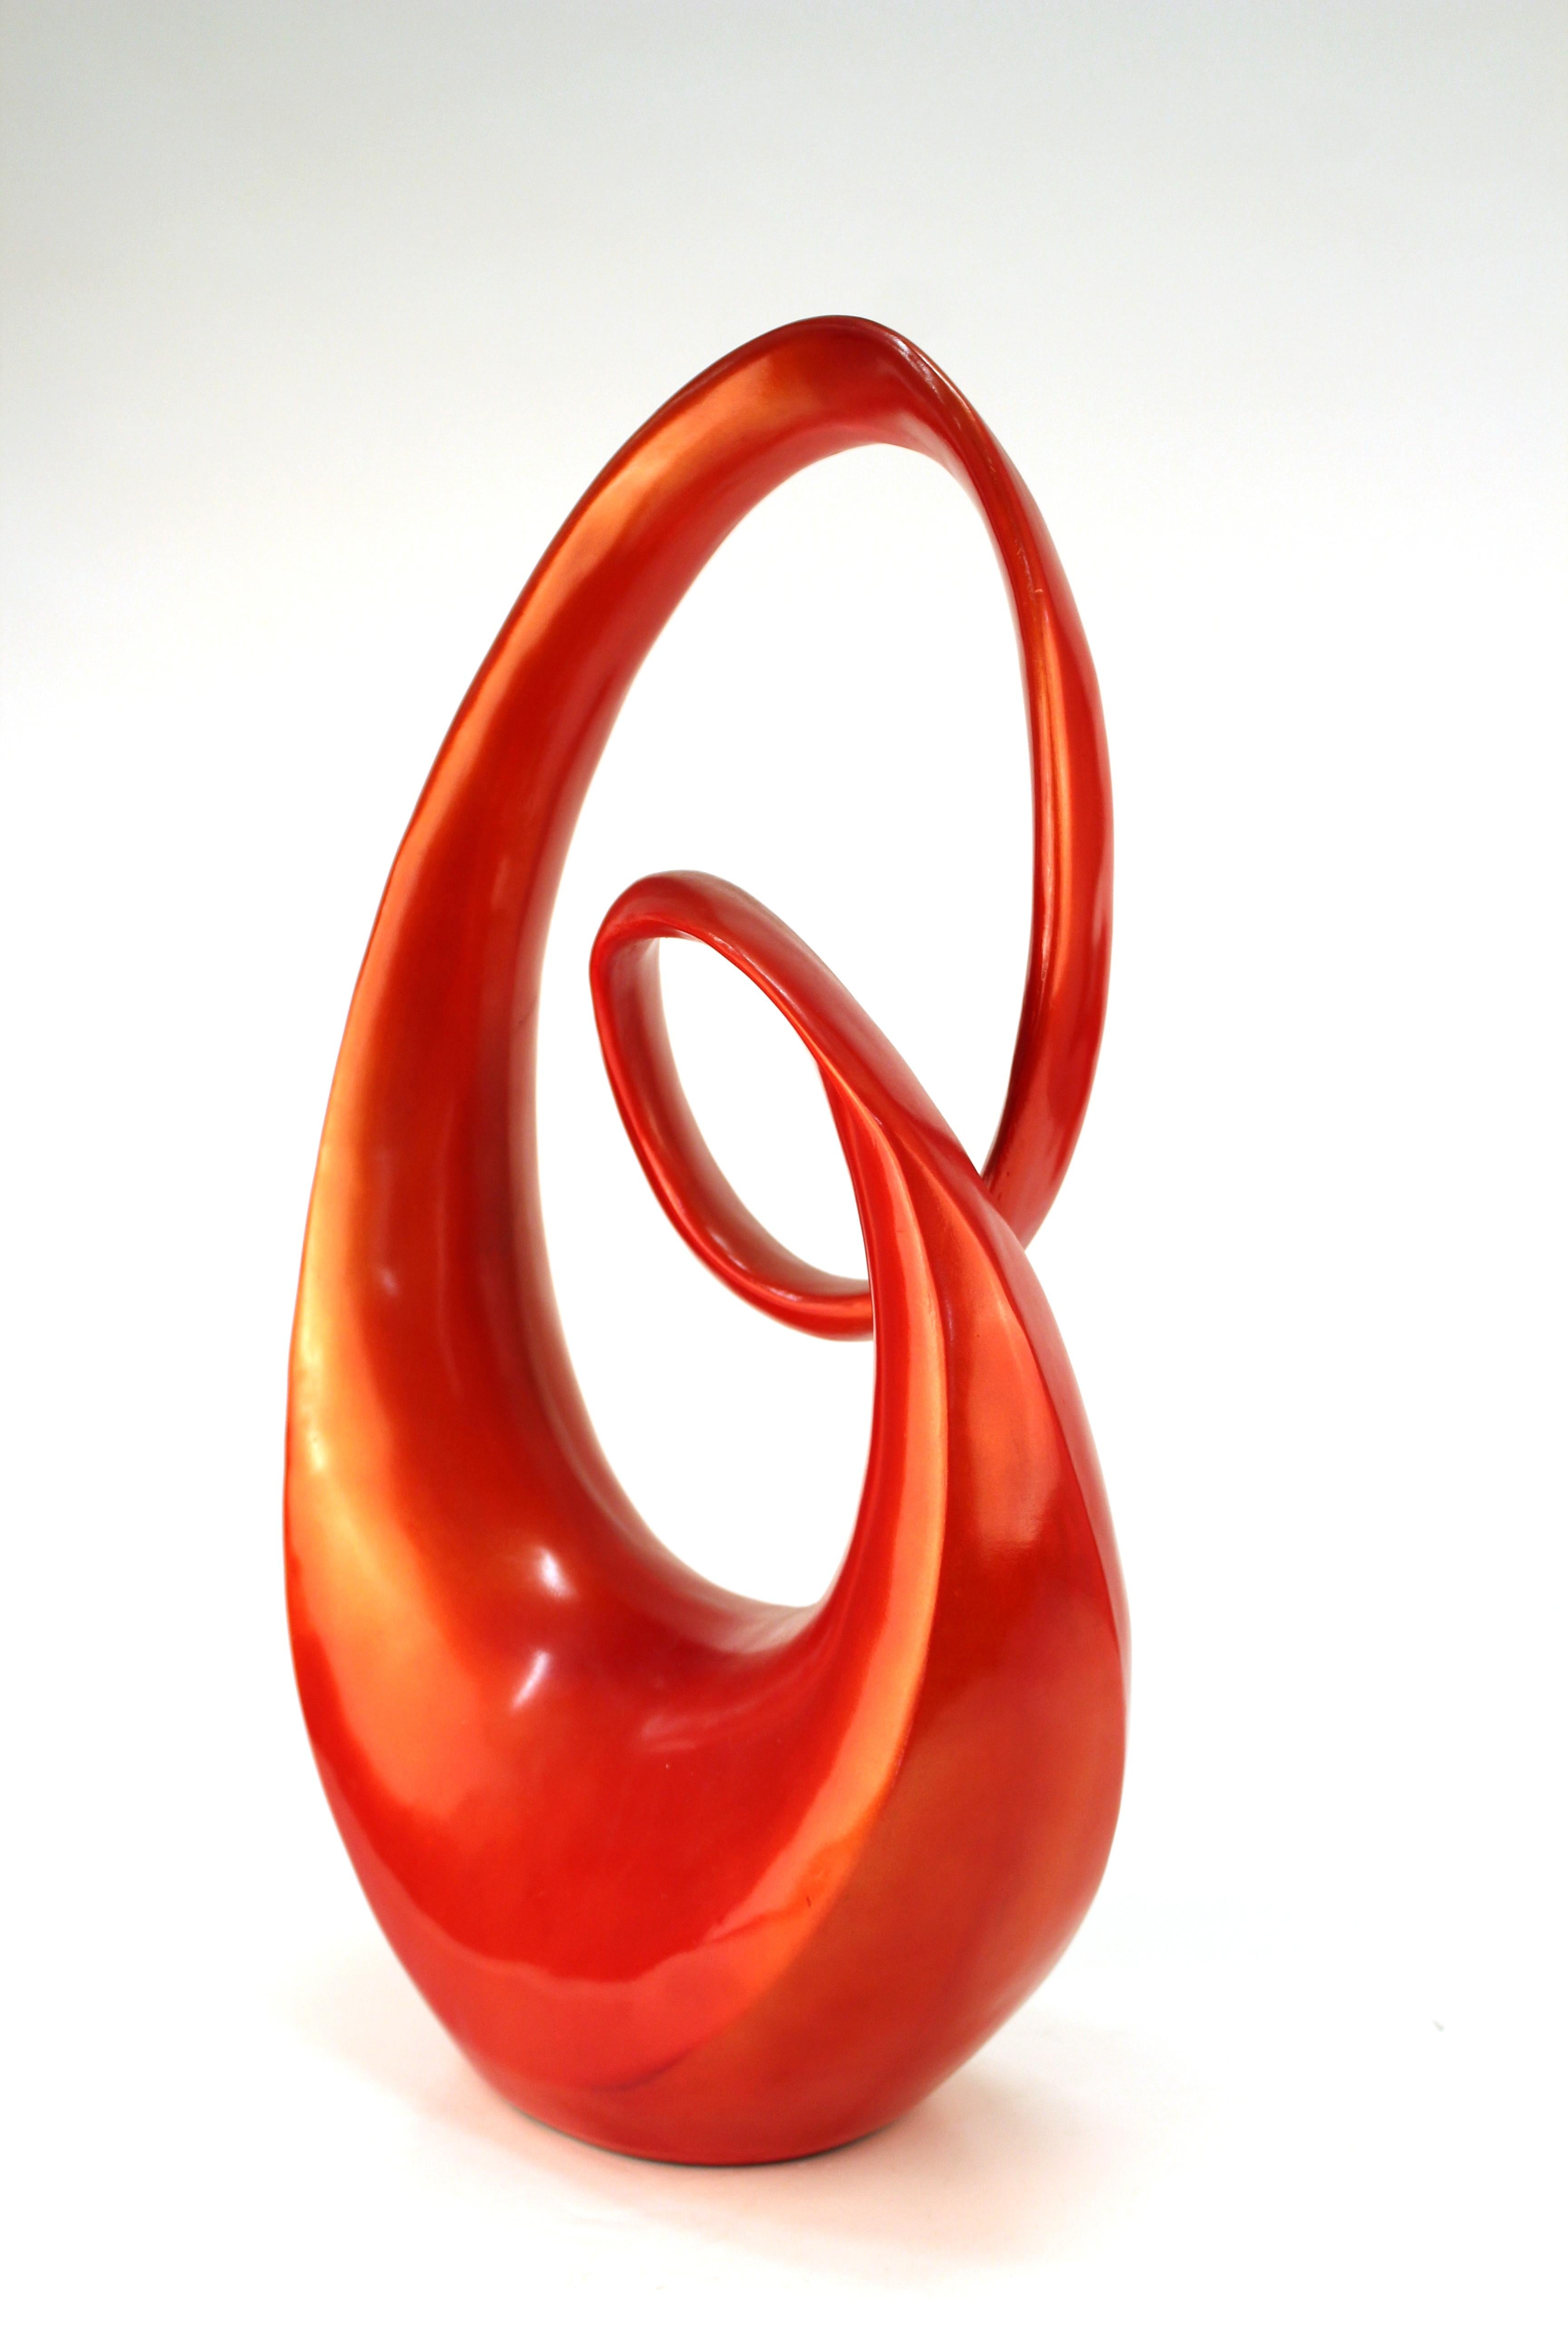 Mid-Century Modern Stohan sculpture with swirly abstract theme, made in red coated resin in the 1970s. The piece is in good vintage condition with age-appropriate wear to the bottom.